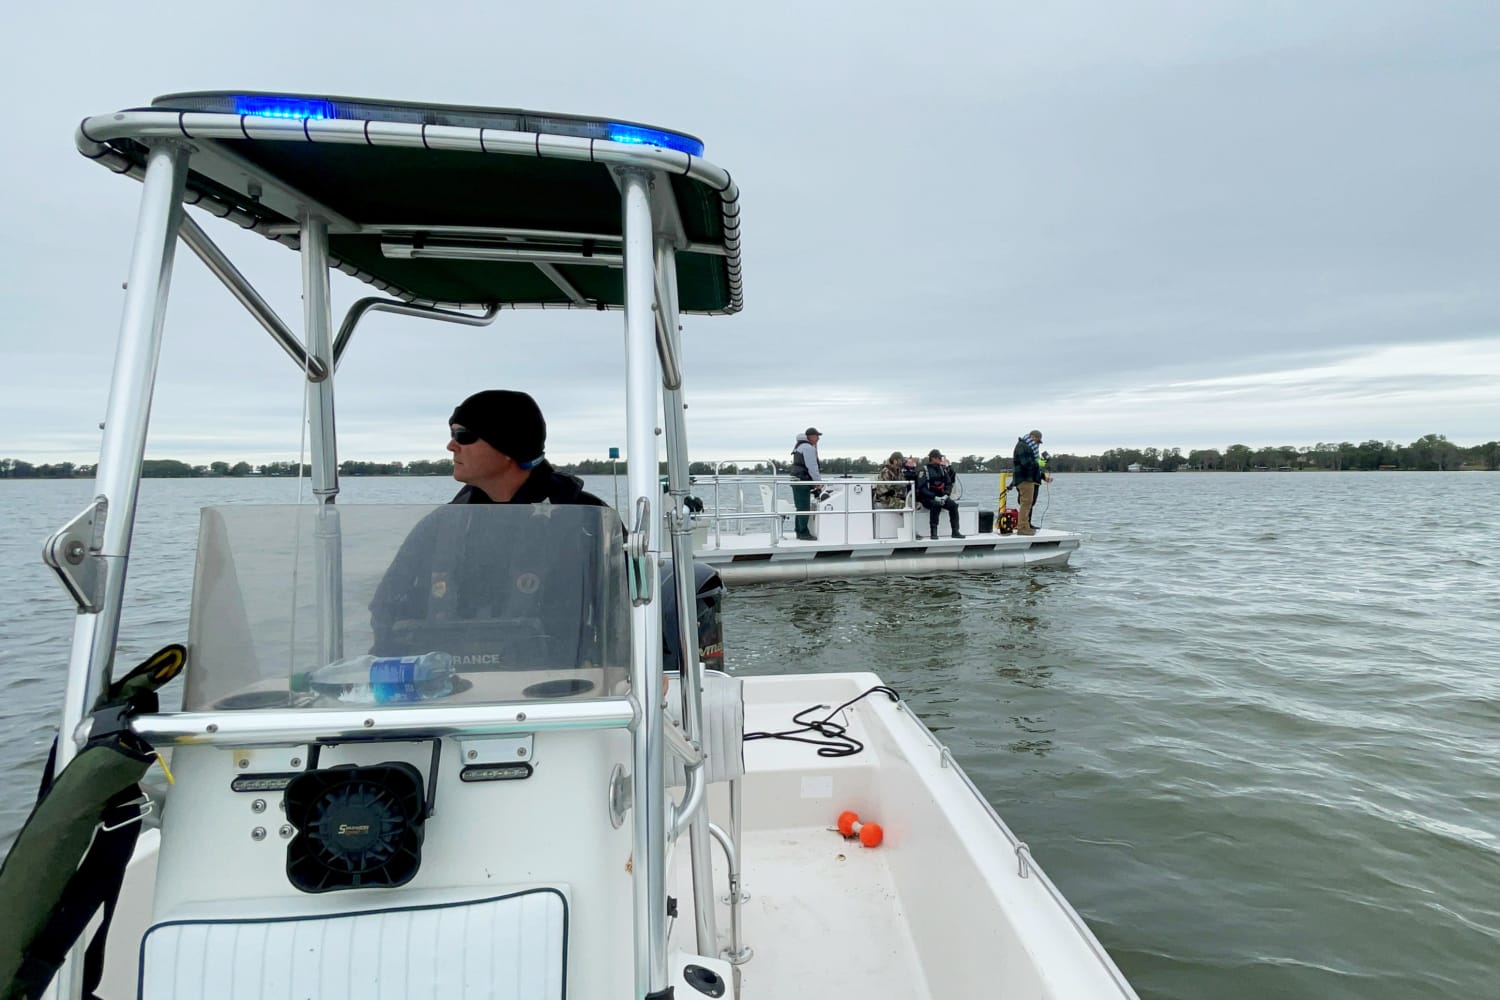 Search on for Florida boaters missing in lake near Legoland